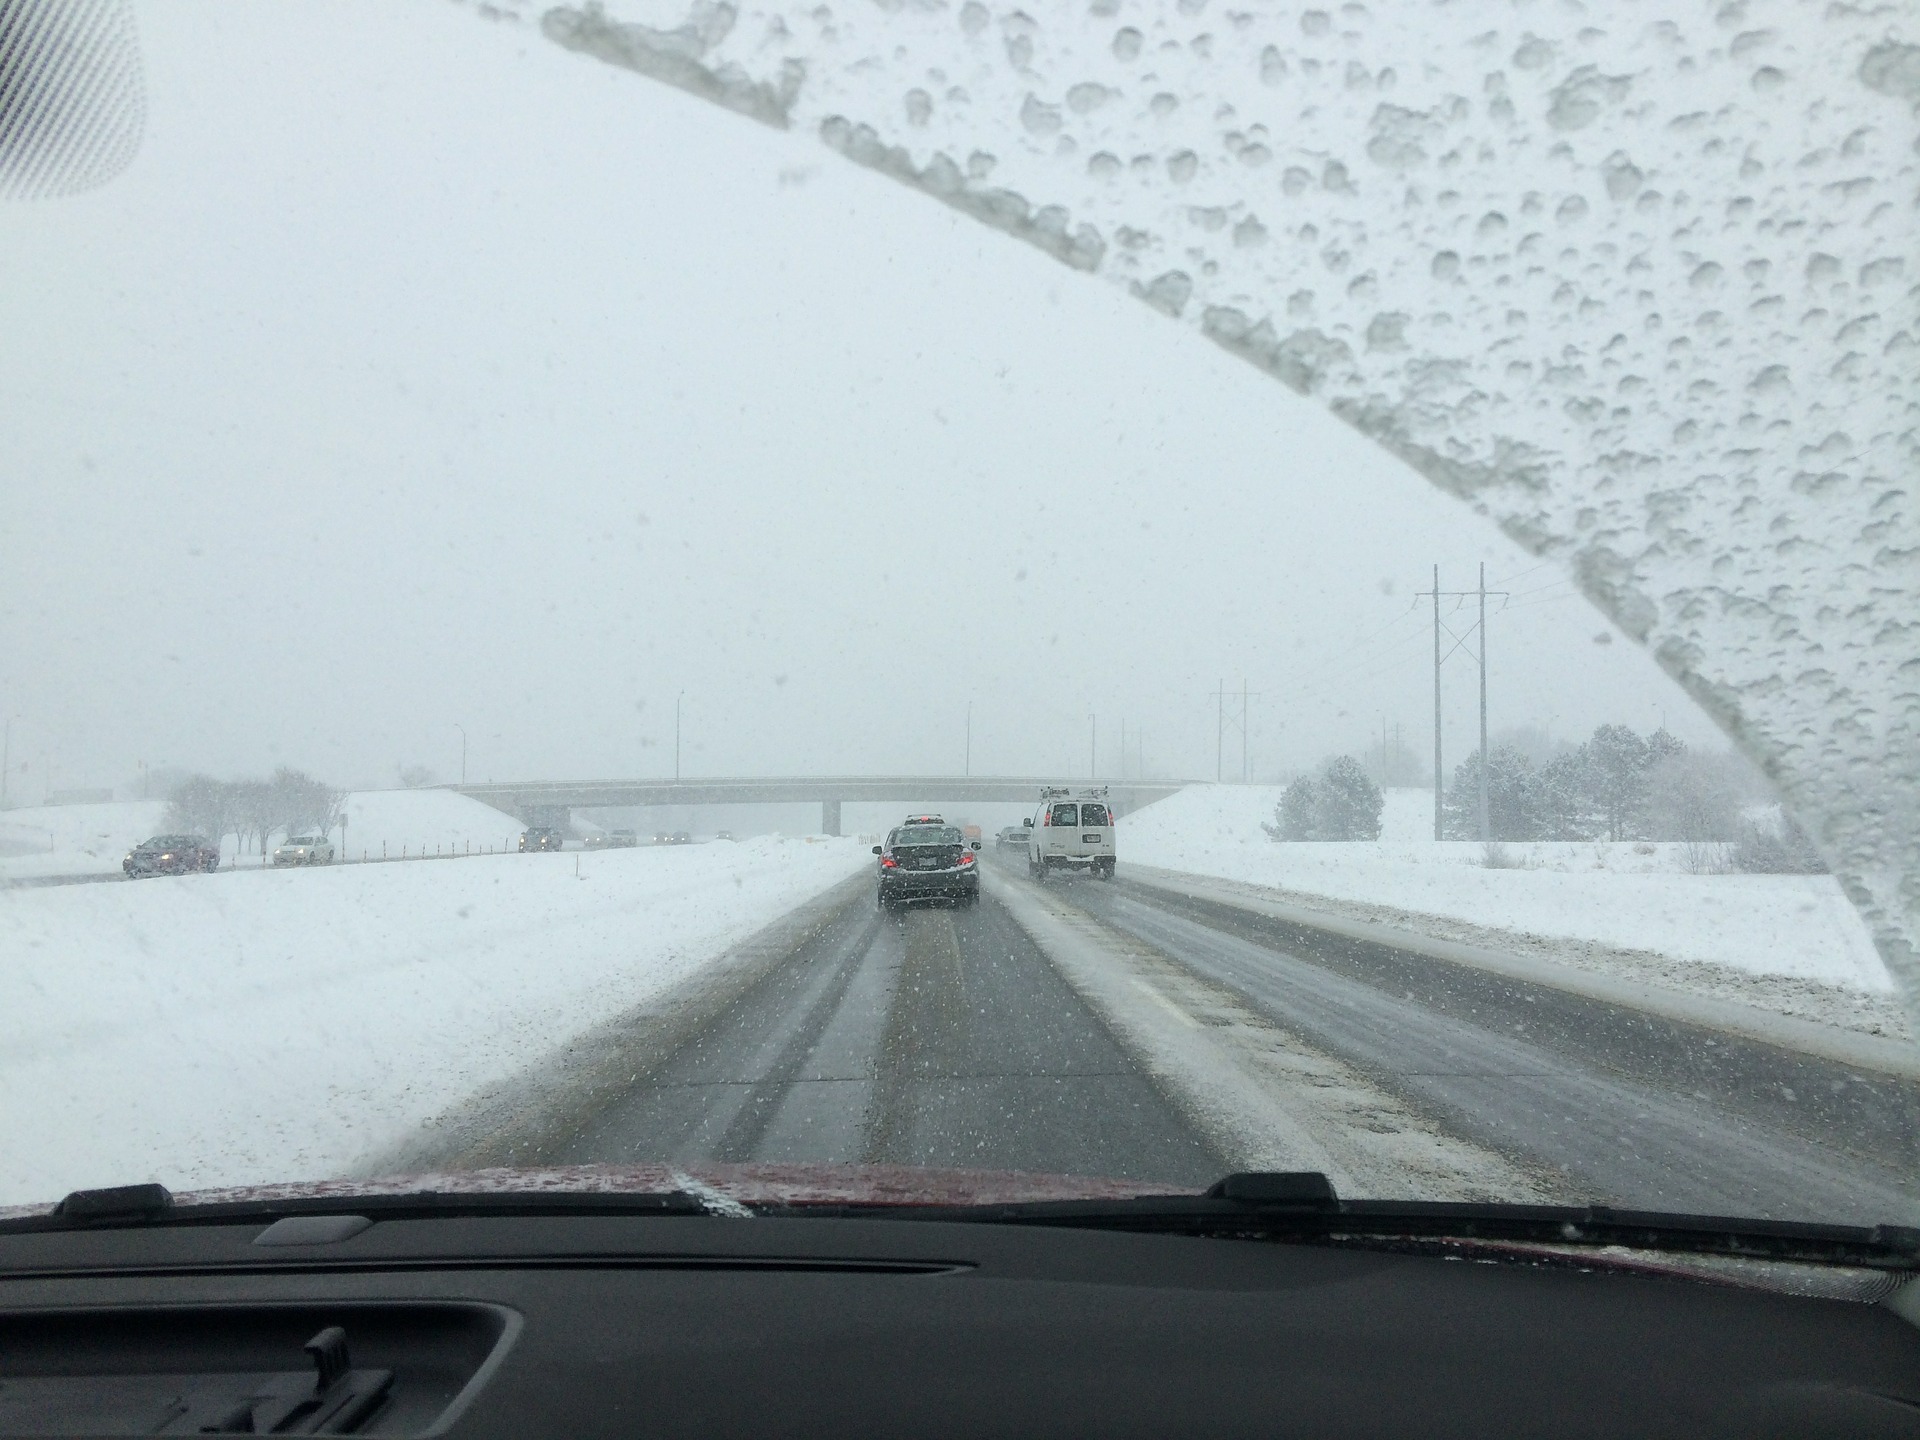 A view from inside a car driving on a snowy highway during a winter storm. The windshield is partially cleared, with the wiper blades leaving streaks of visibility through the snow and ice buildup. Several vehicles, including a van and a car, are ahead on the road, navigating the snow-covered lanes.